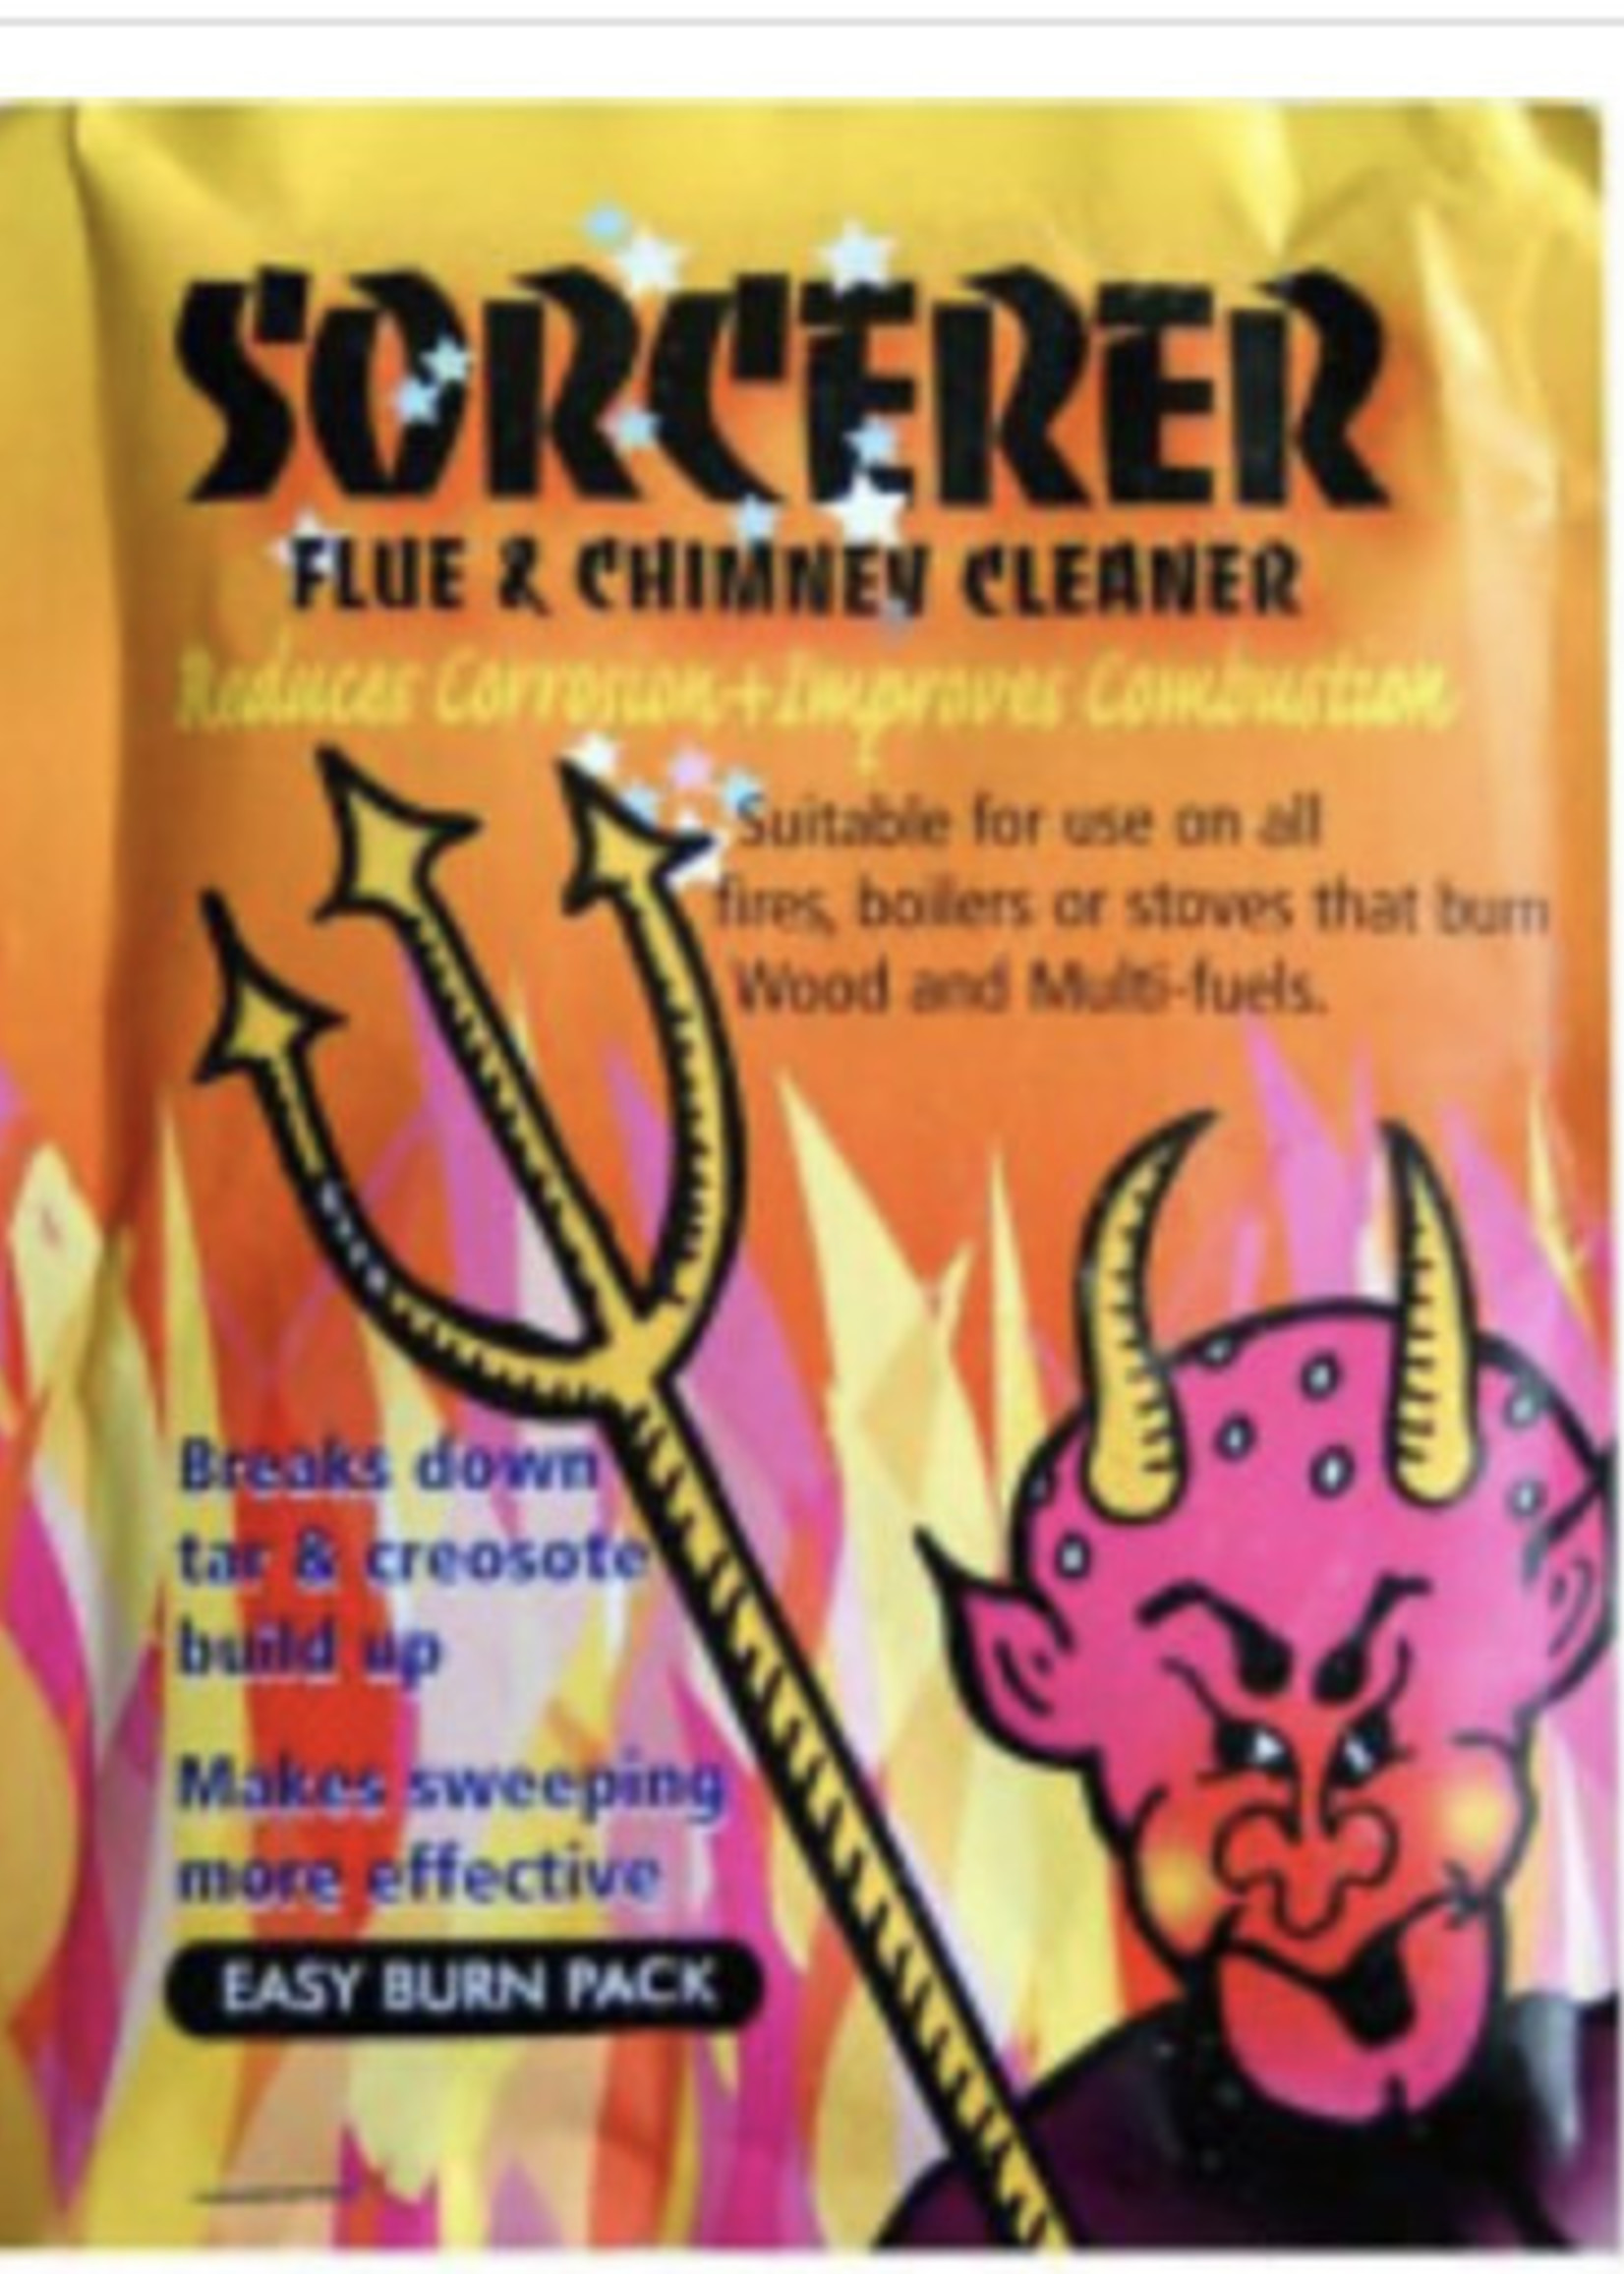 The gallery Sorcerer Flue and Chimney Cleaner